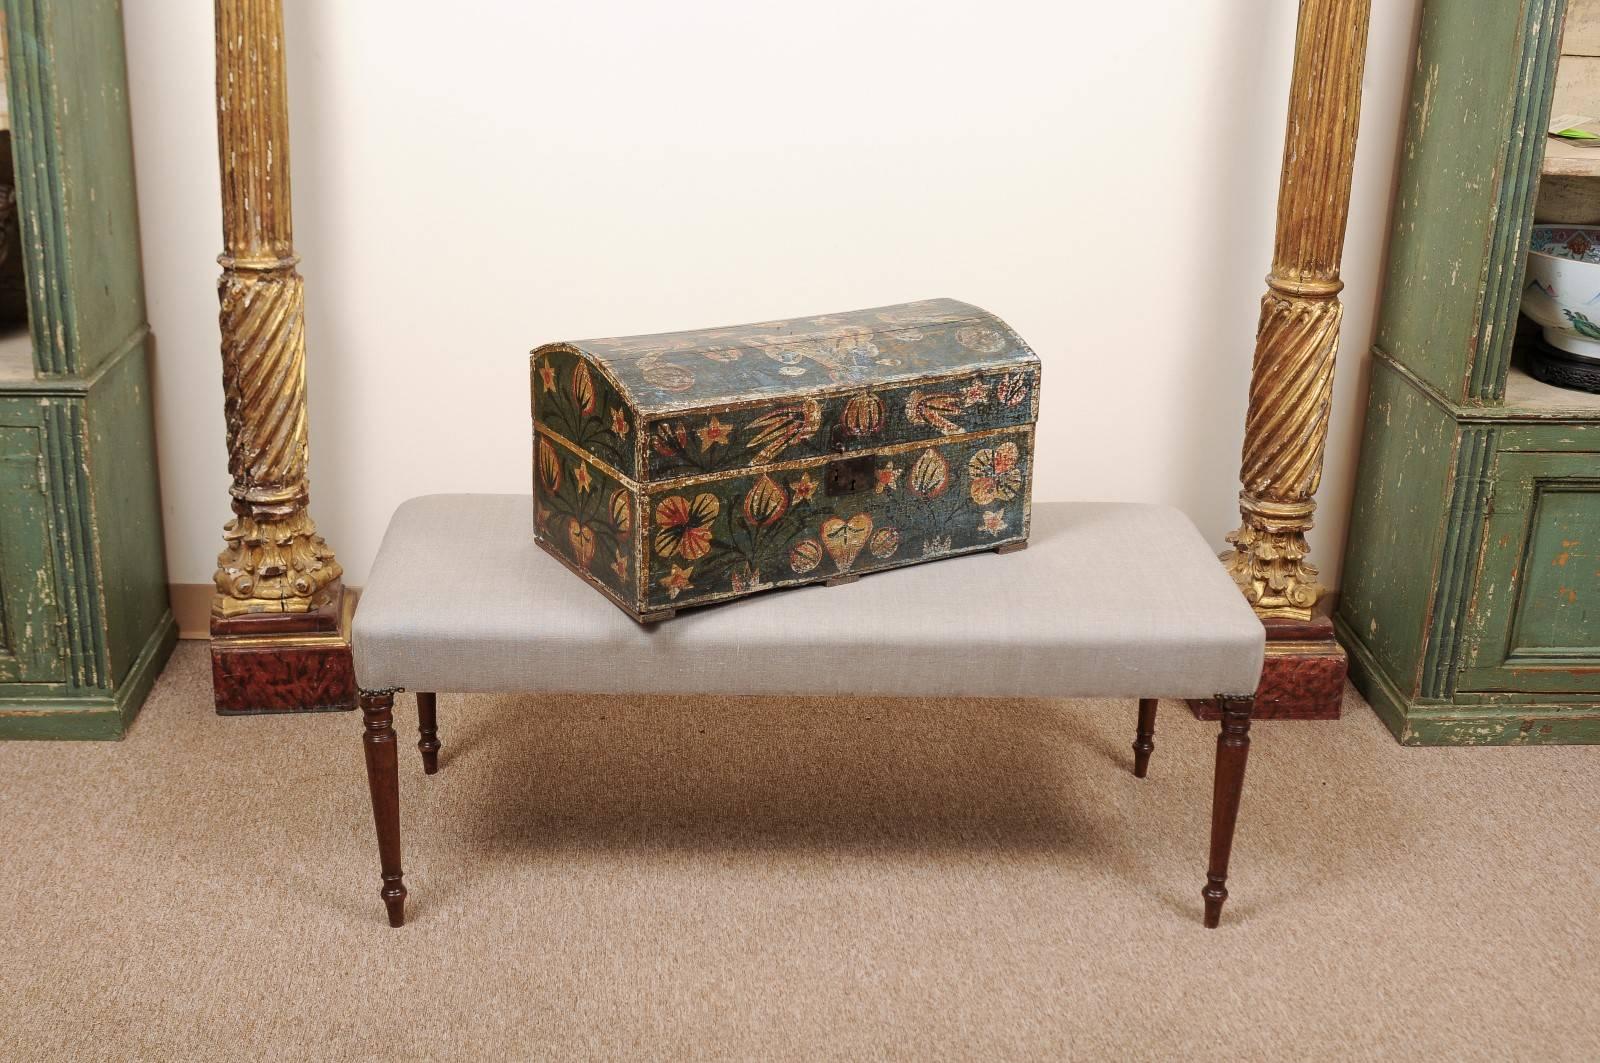 Hand-Painted 19th Century, Swedish Painted Brides Box with Floral Motif